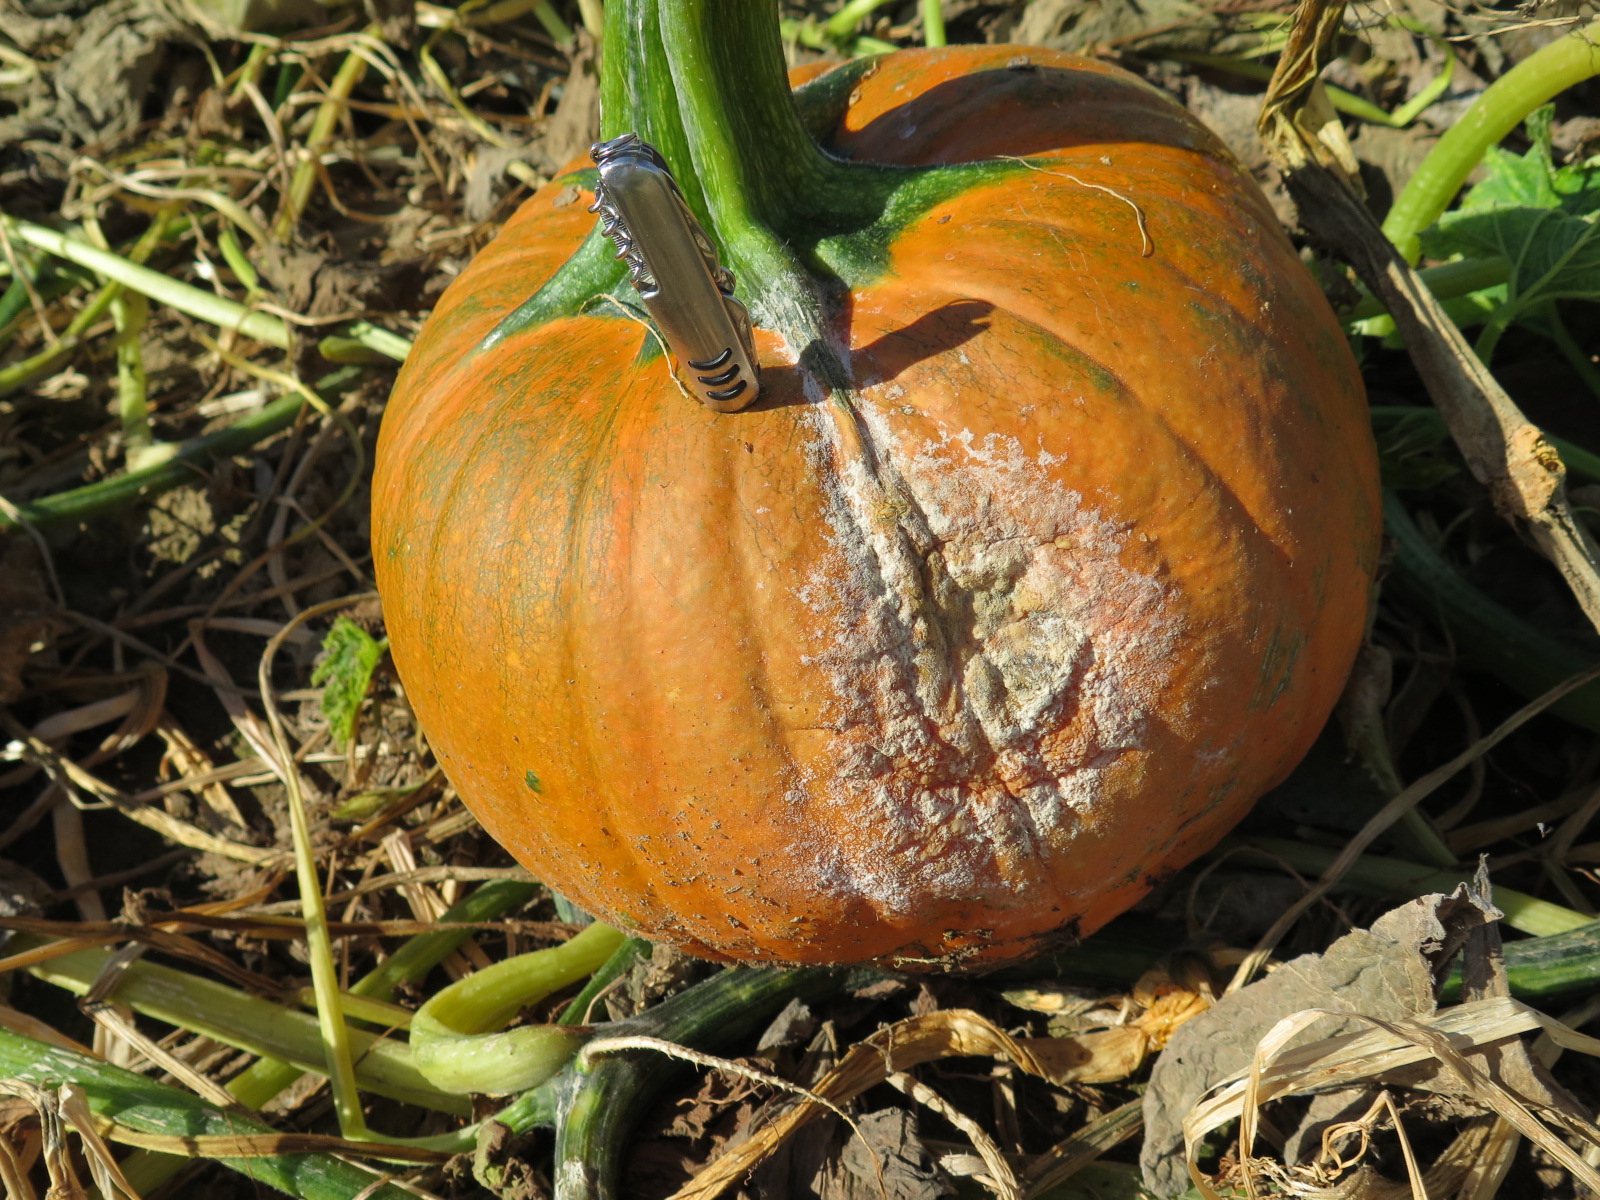  Figure 1. Phytophthora fruit rot of pumpkin.